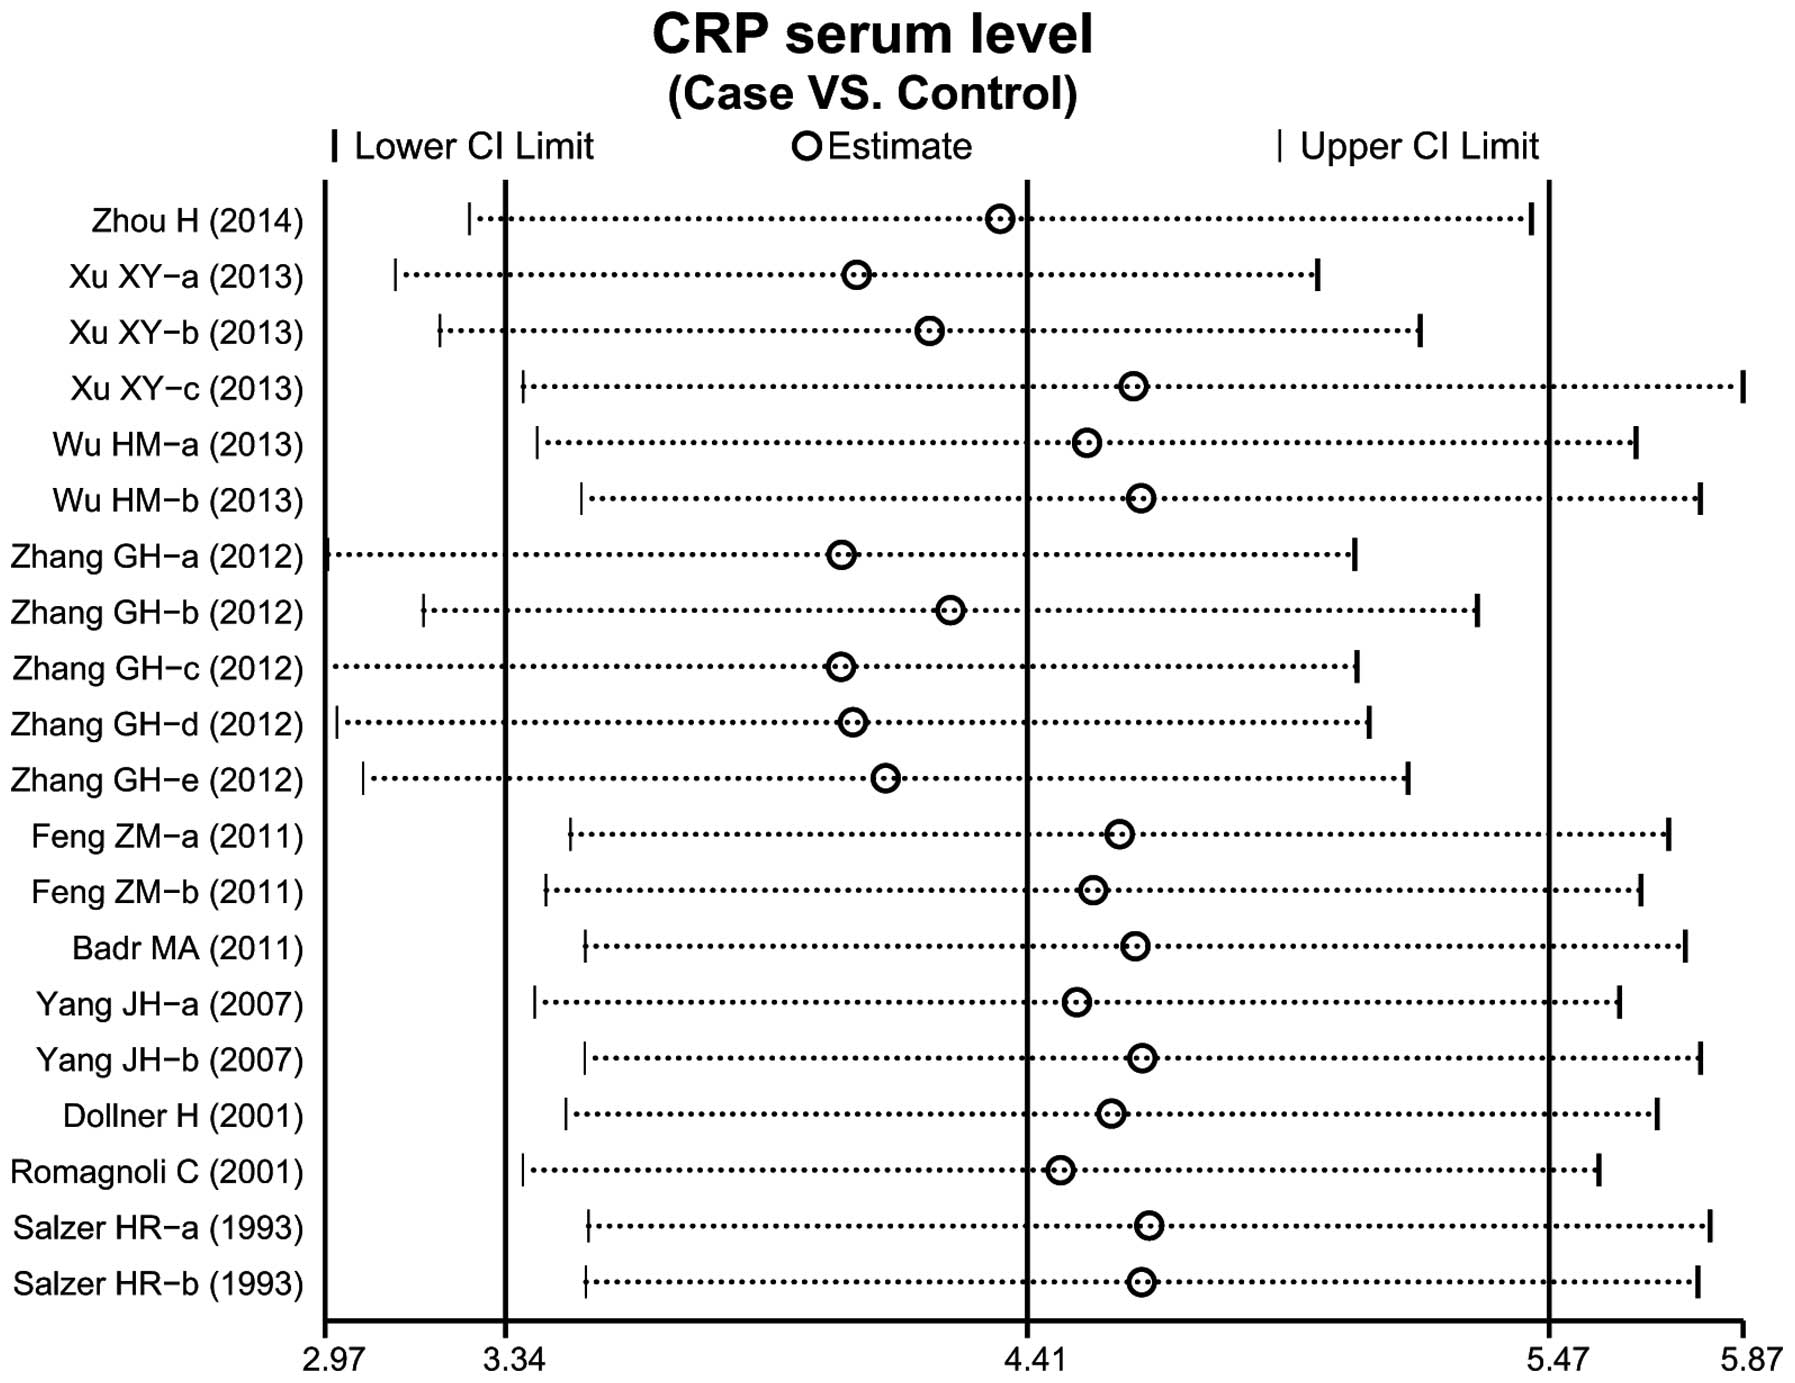 What is a normal range for CRP levels?